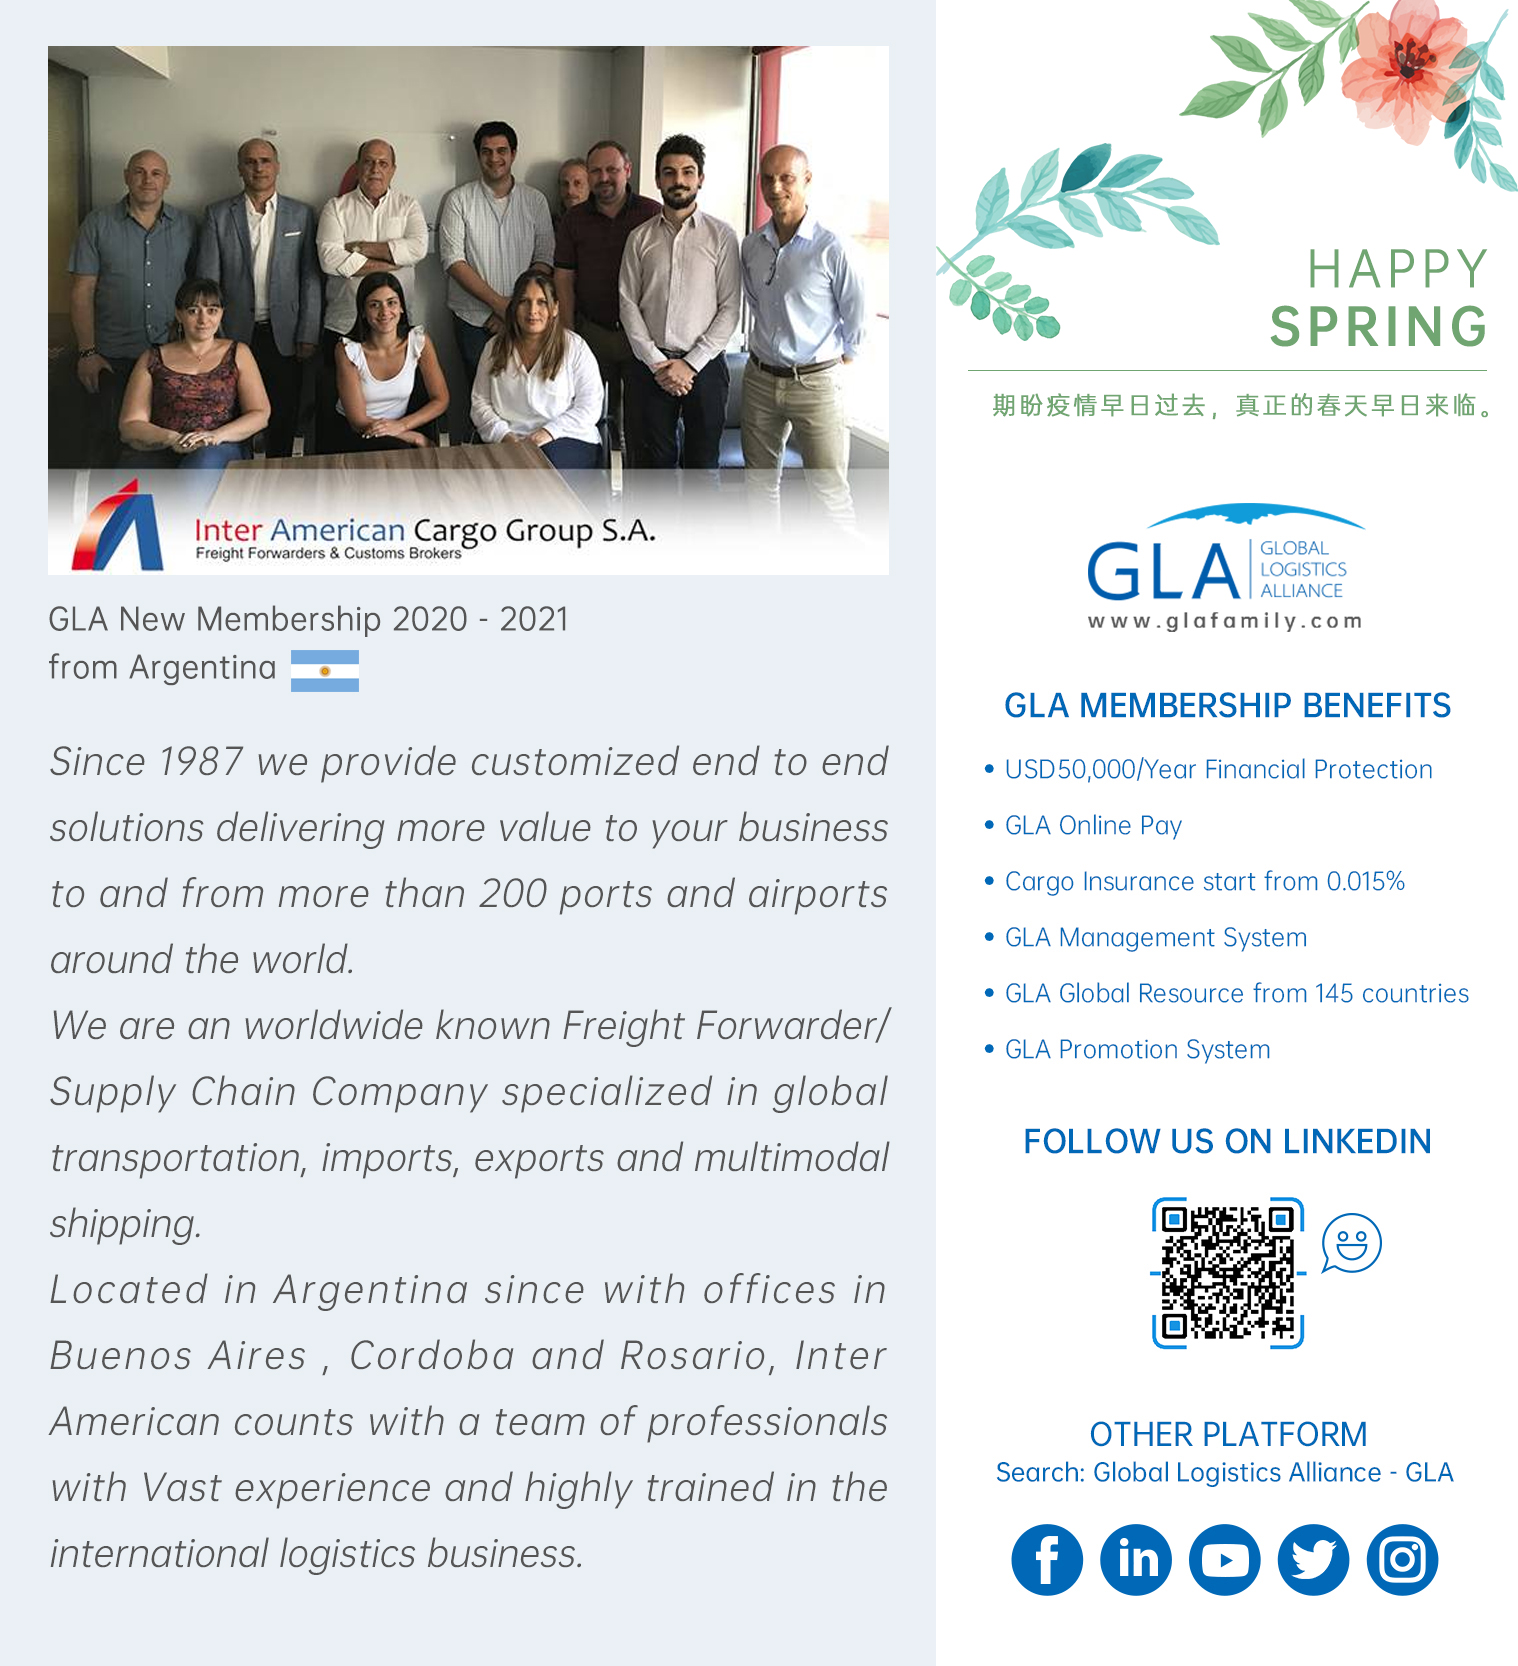 GLA NEW MEMBERSHIP | Inter American Cargo Group S.A